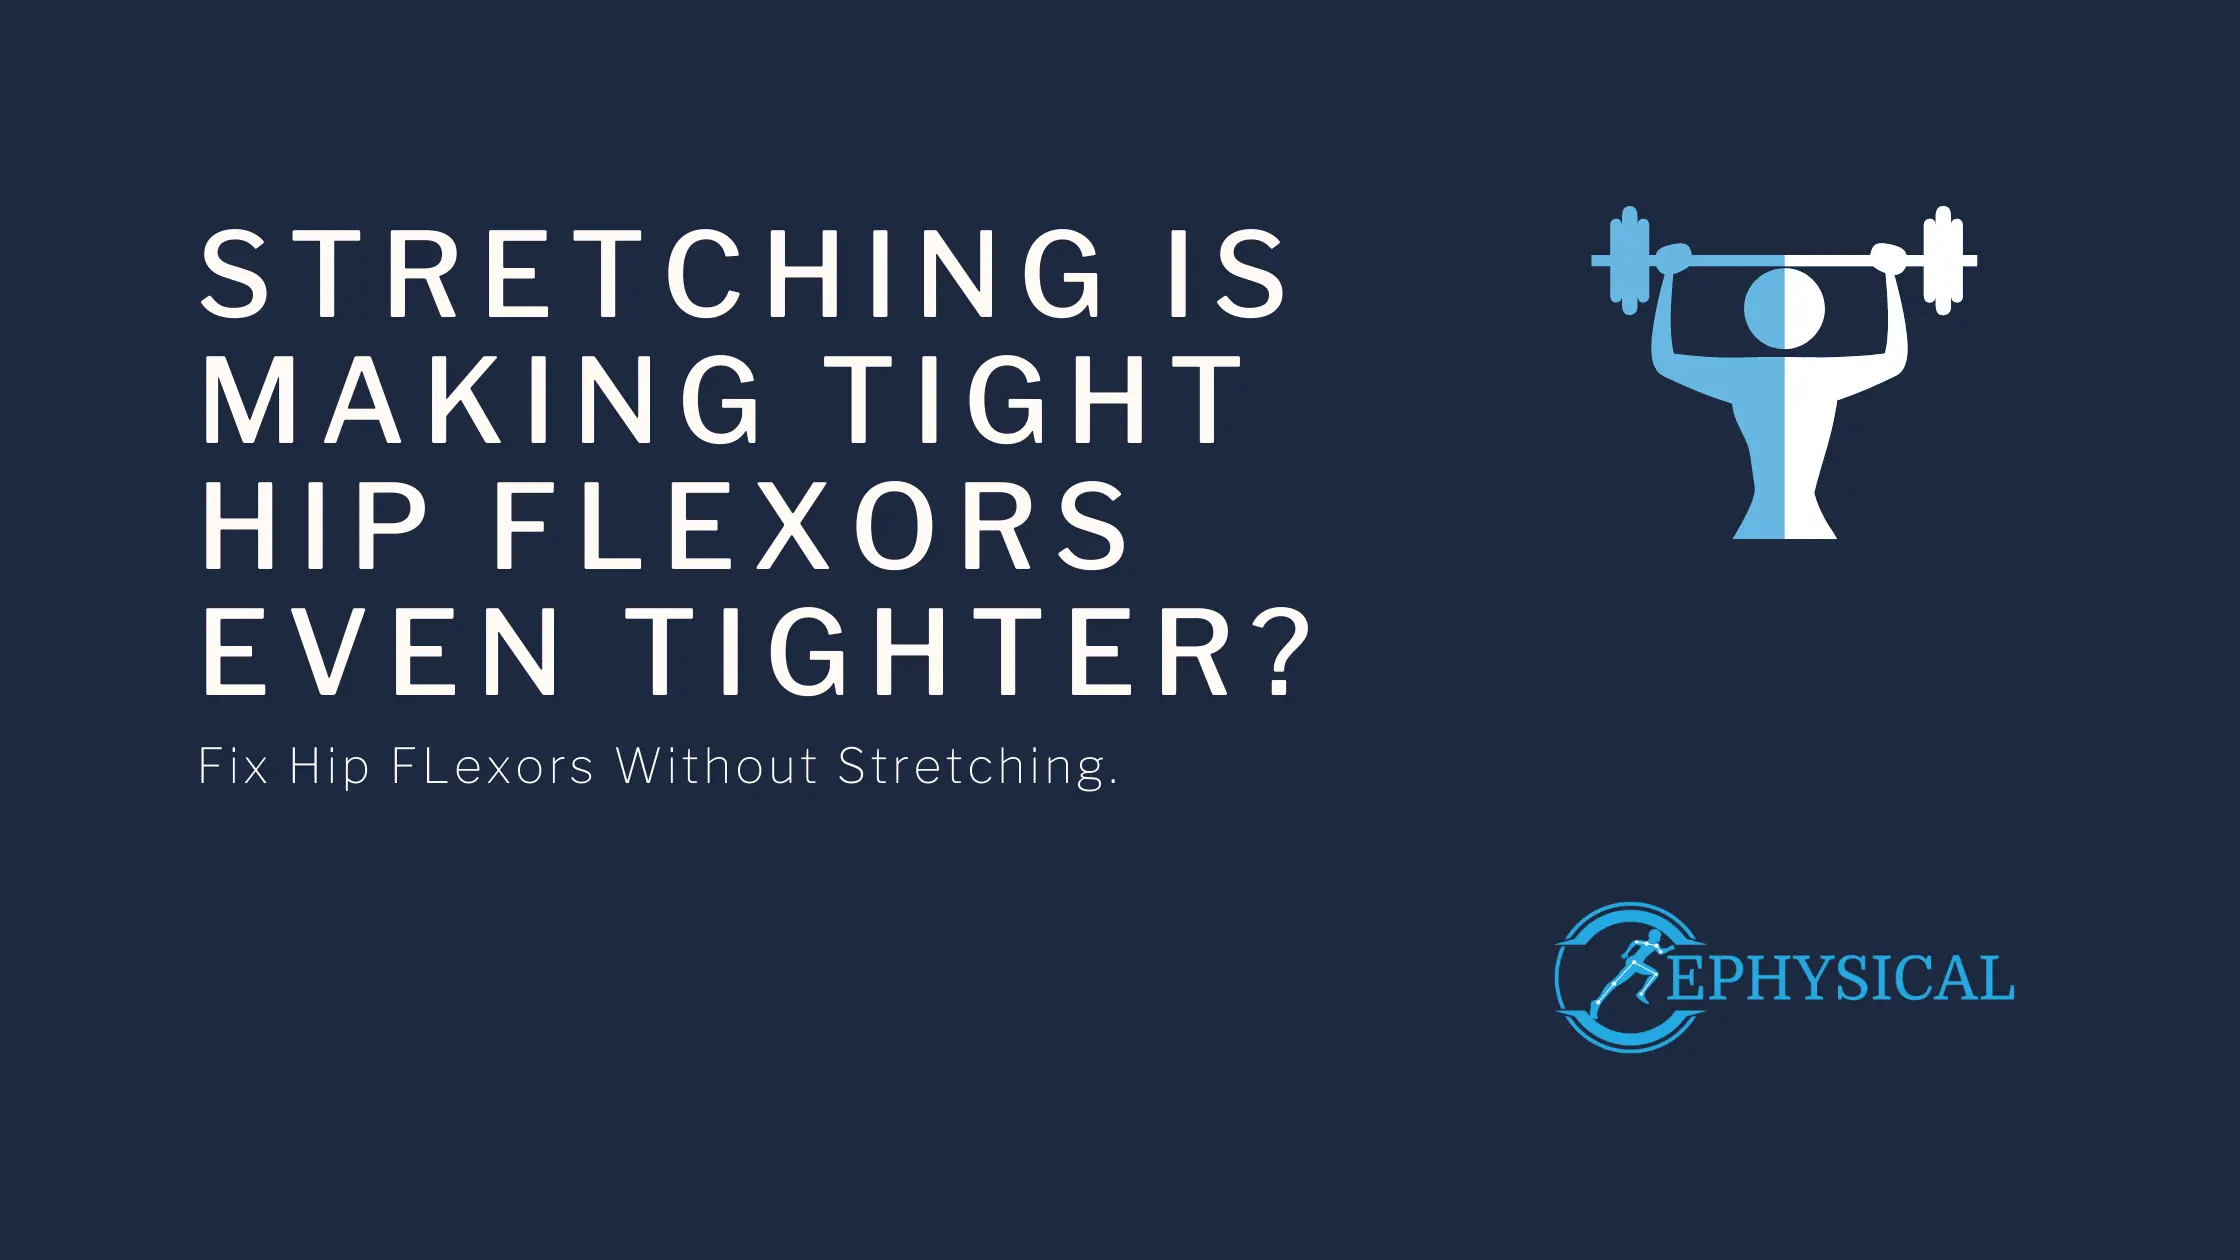 Stretching is making tight hip flexors even tighter